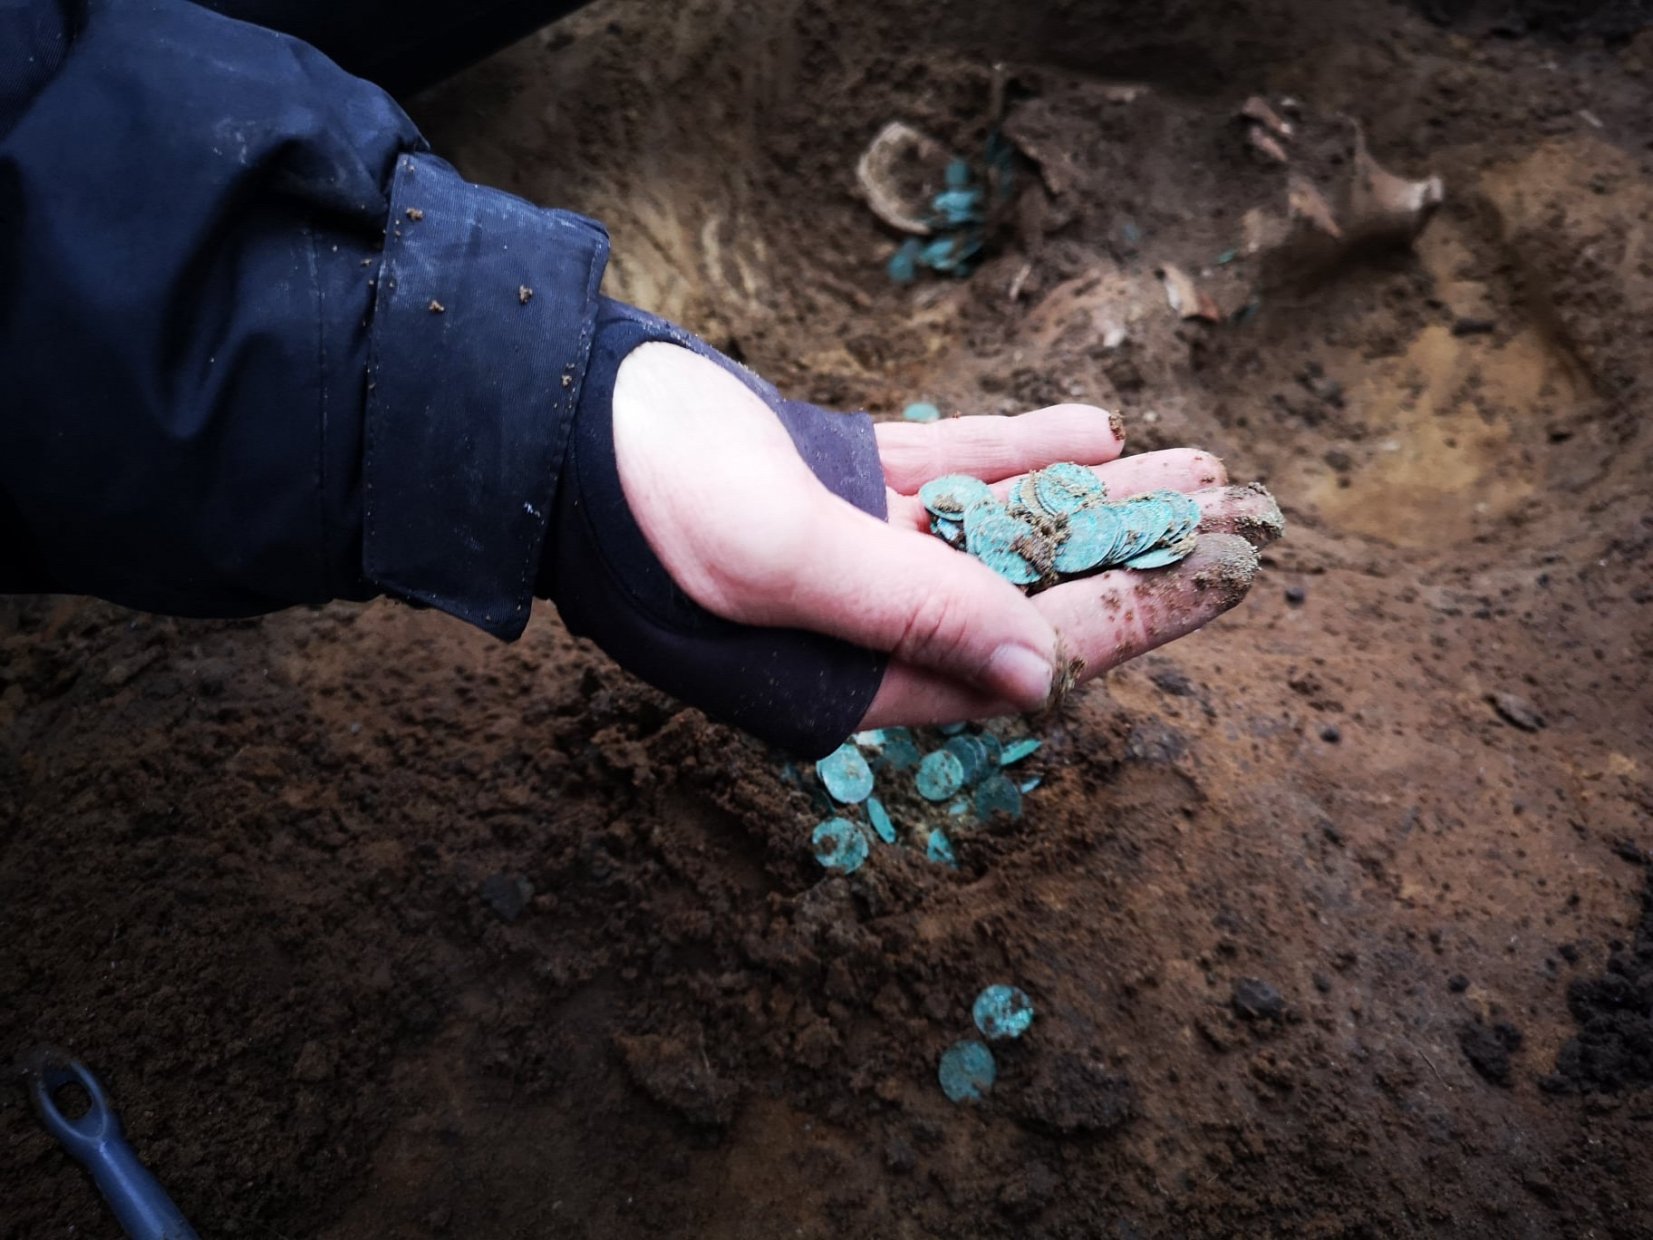 Thousands of medieval coins unearthed in Hungary 2021